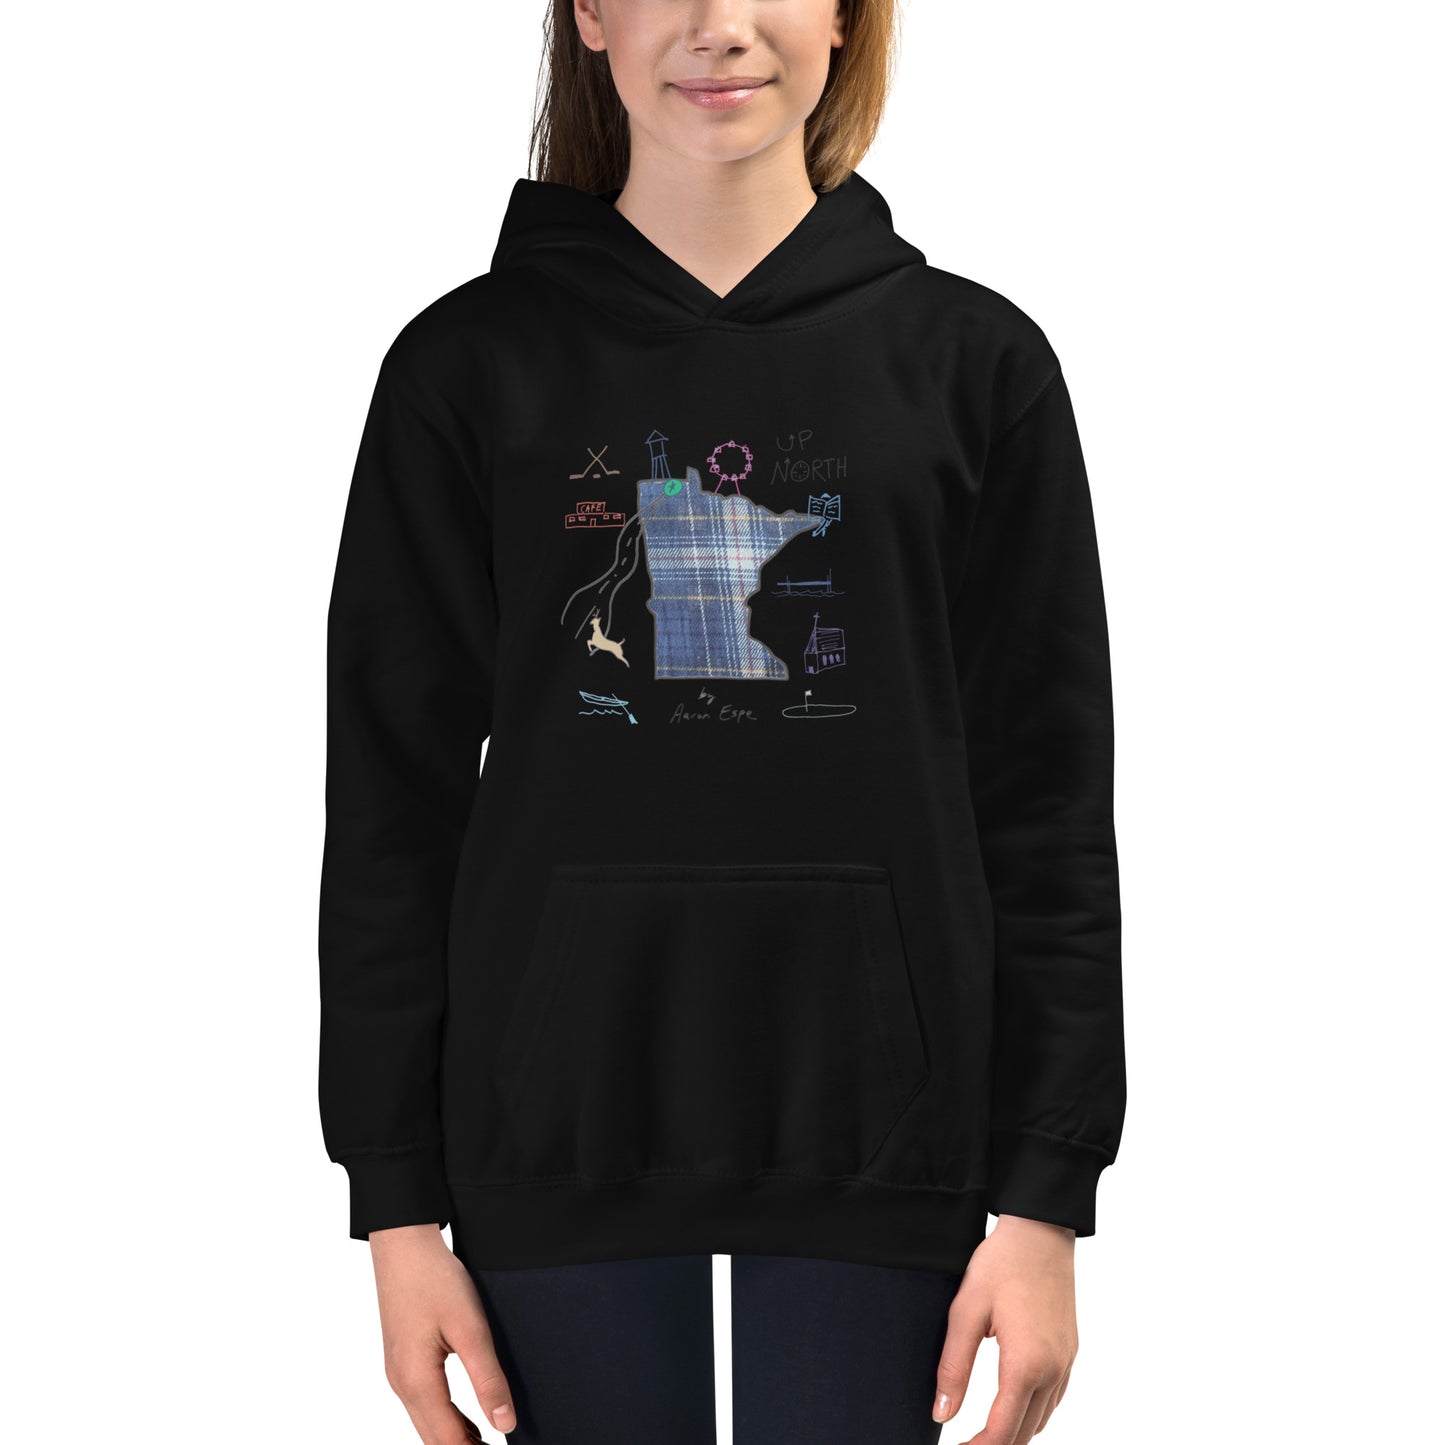 Youth Hoodie Up North Art